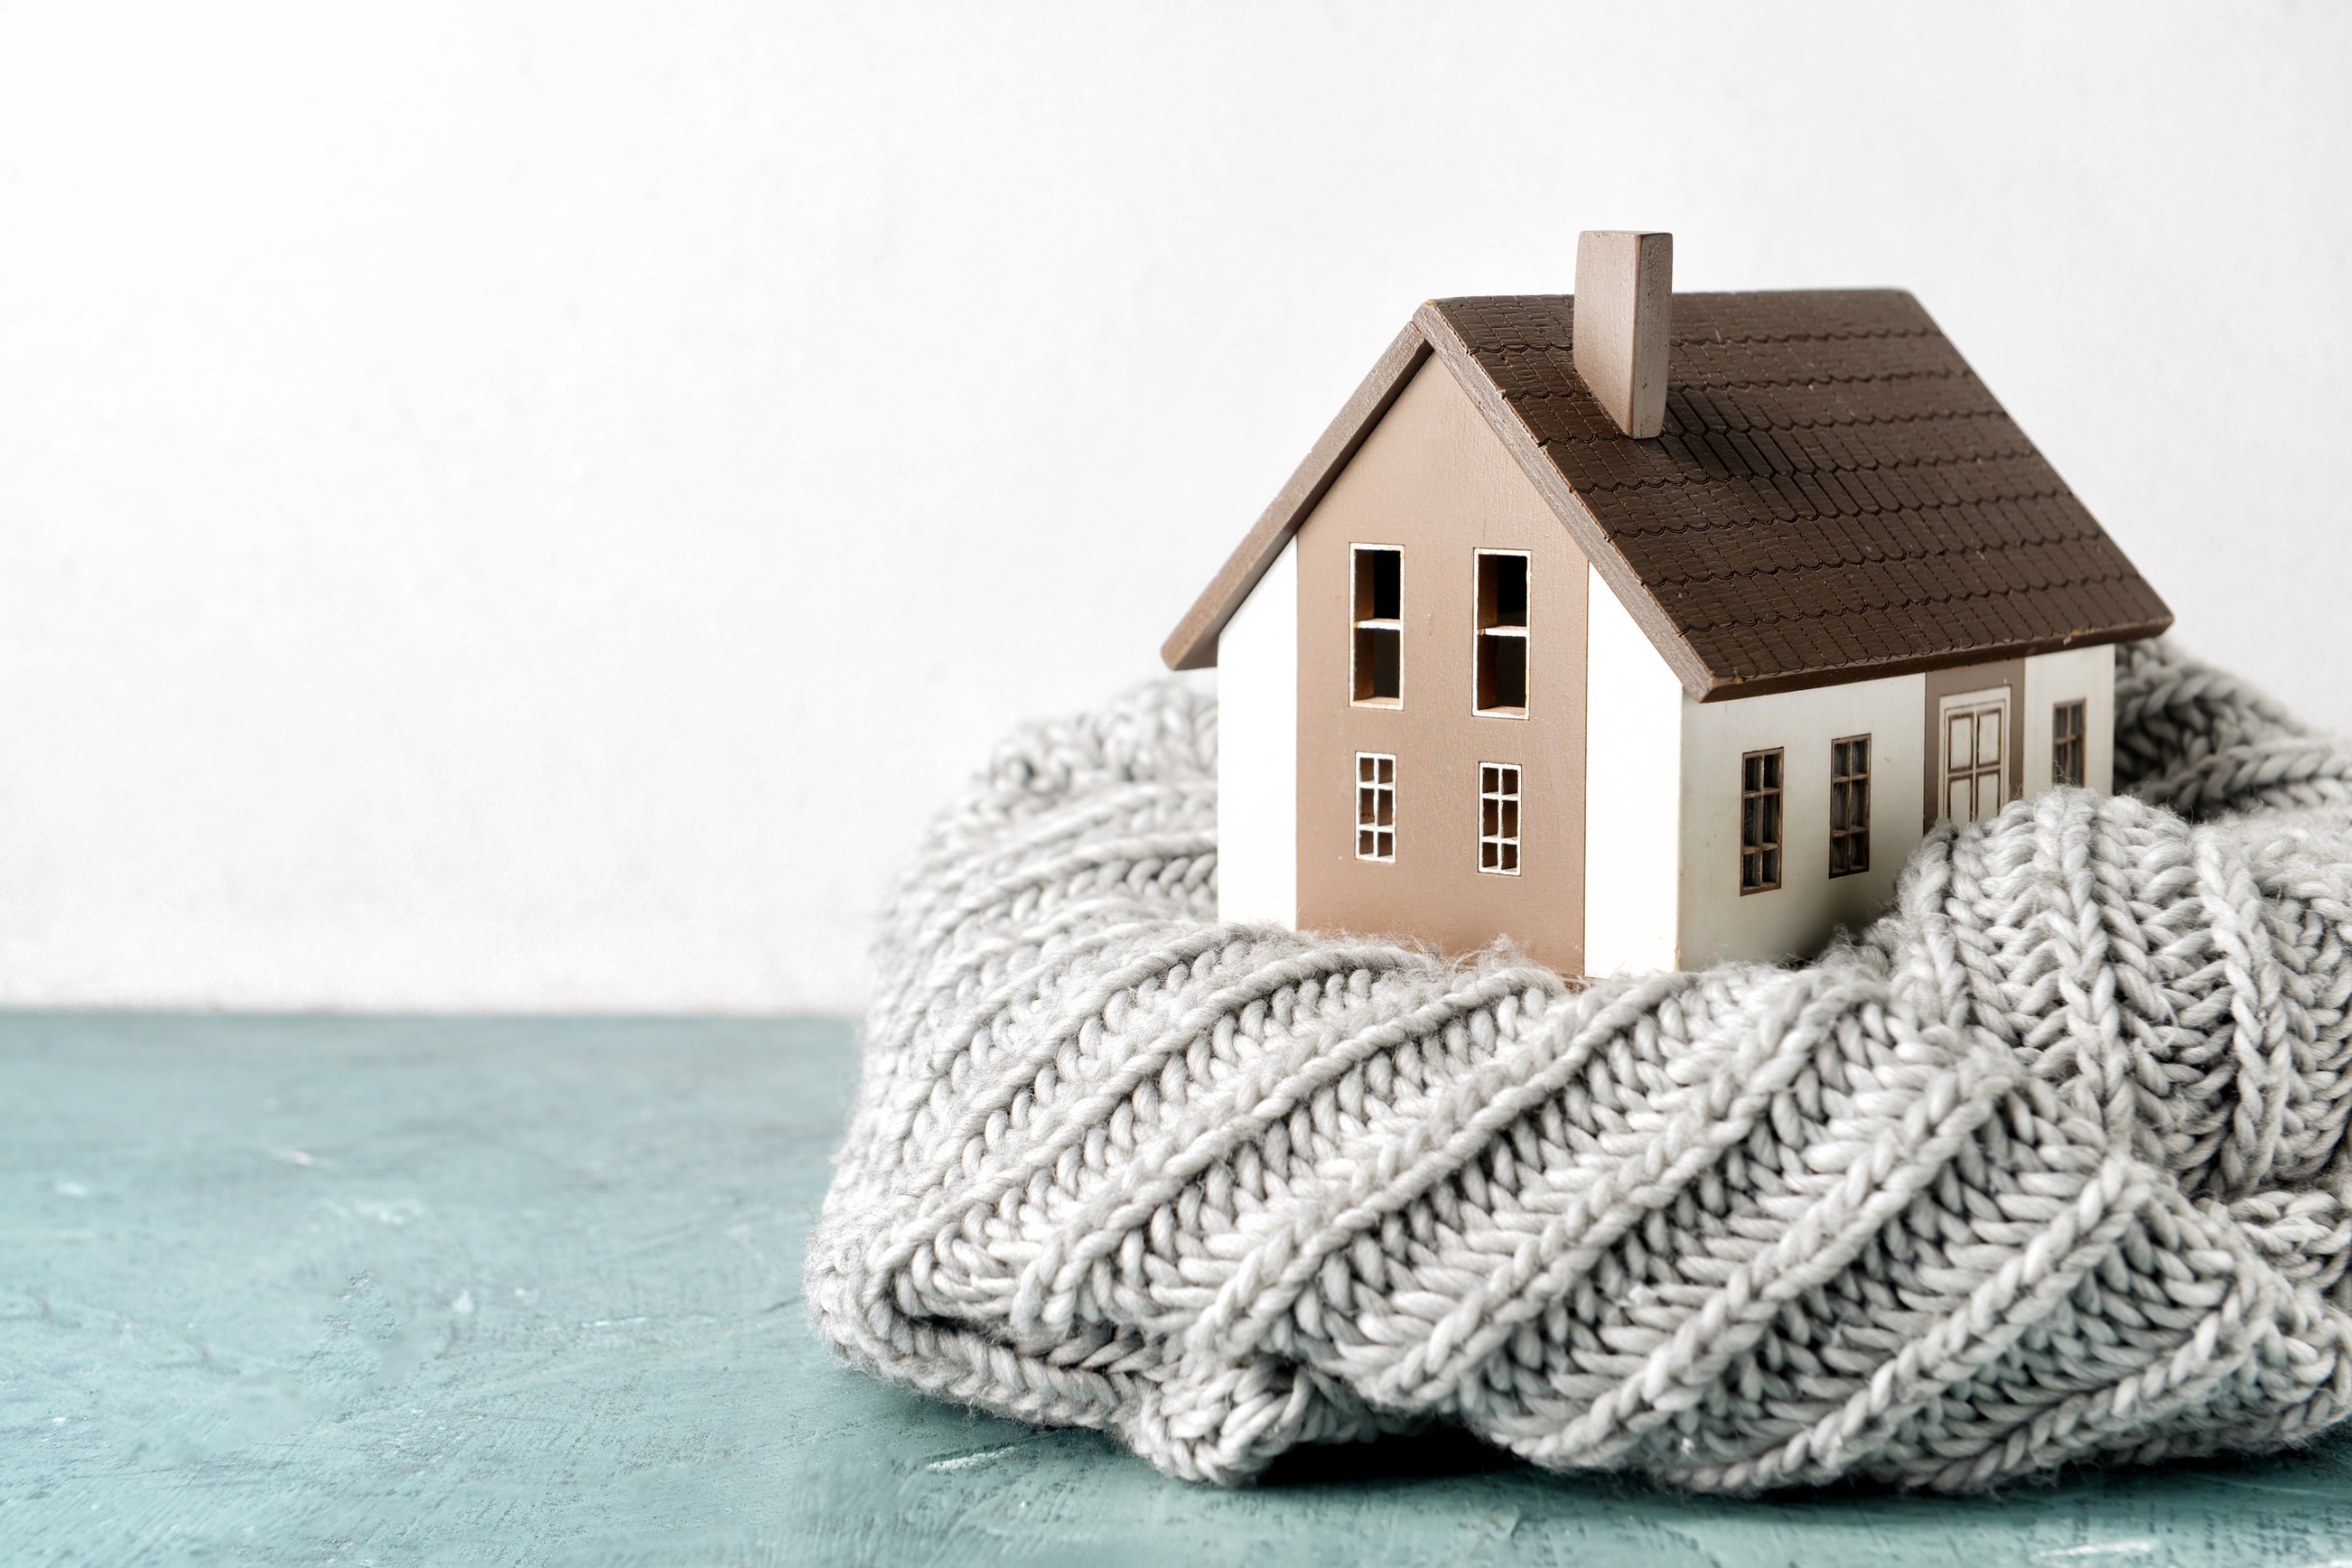 Home model covered with a woolen scarf